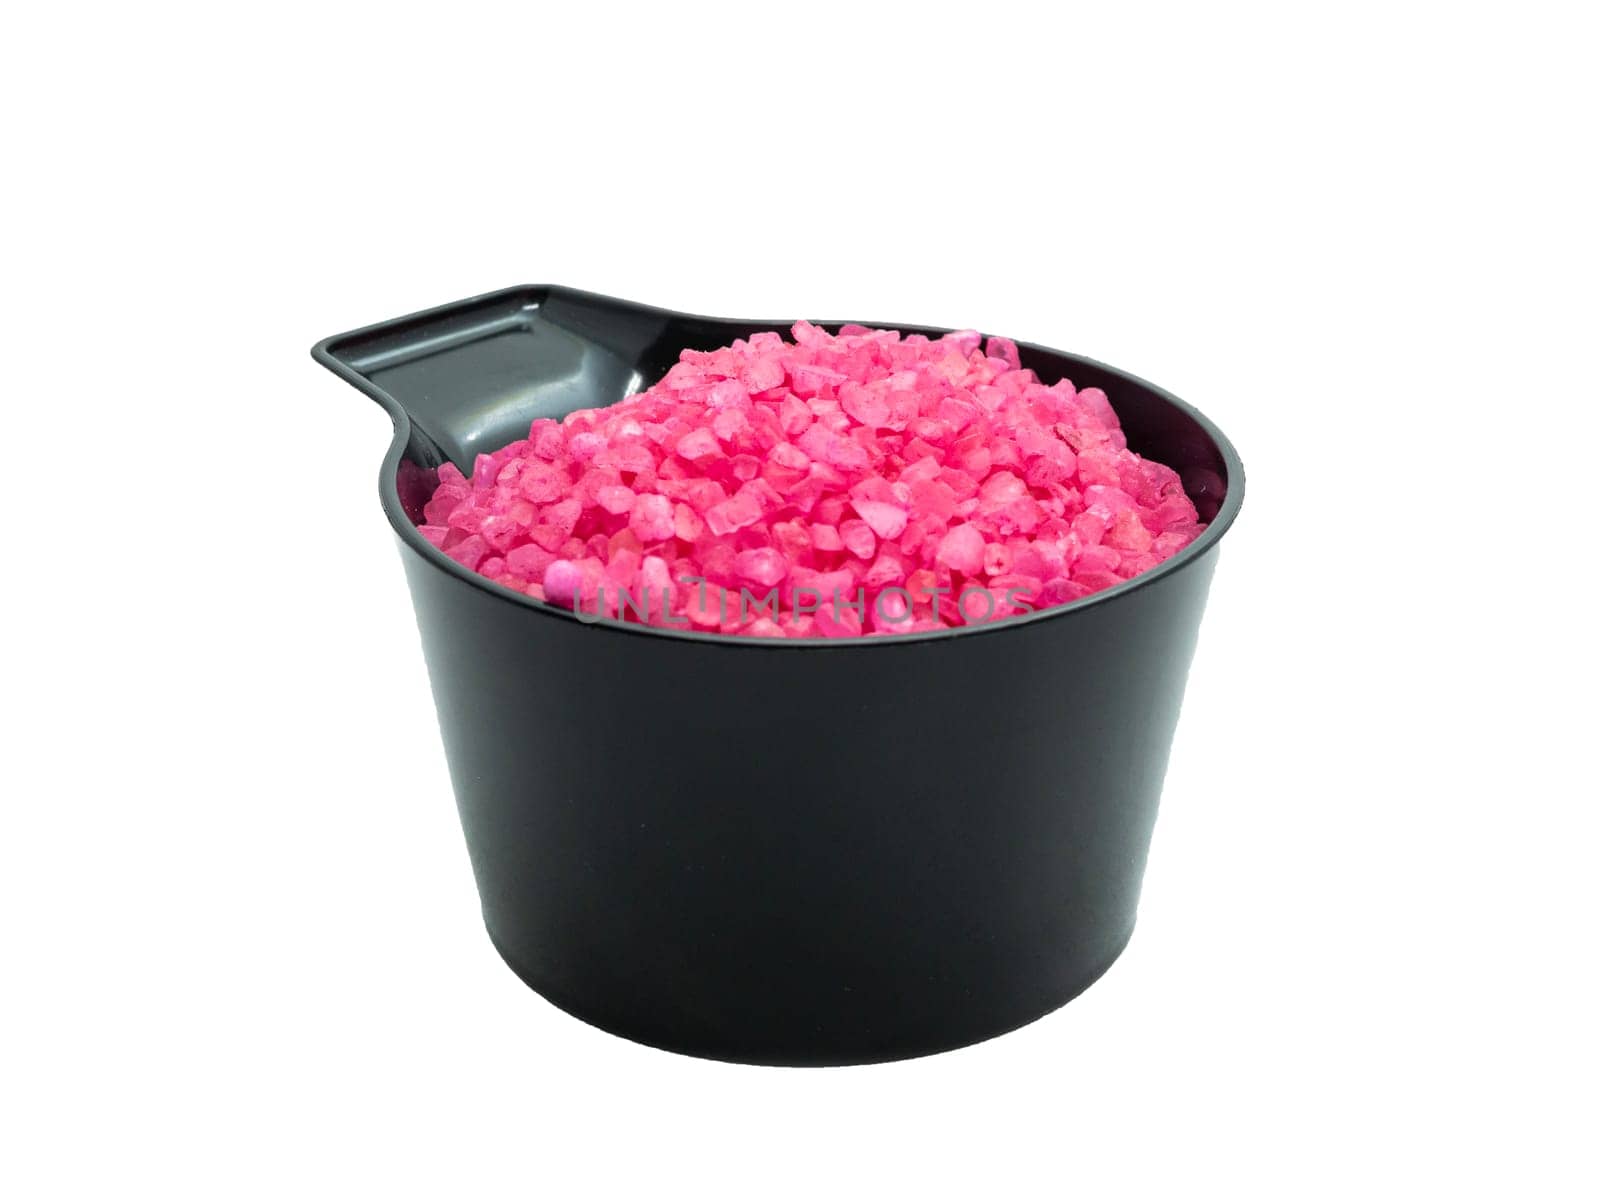 pink bath salt in a black cup isolated. spa concept